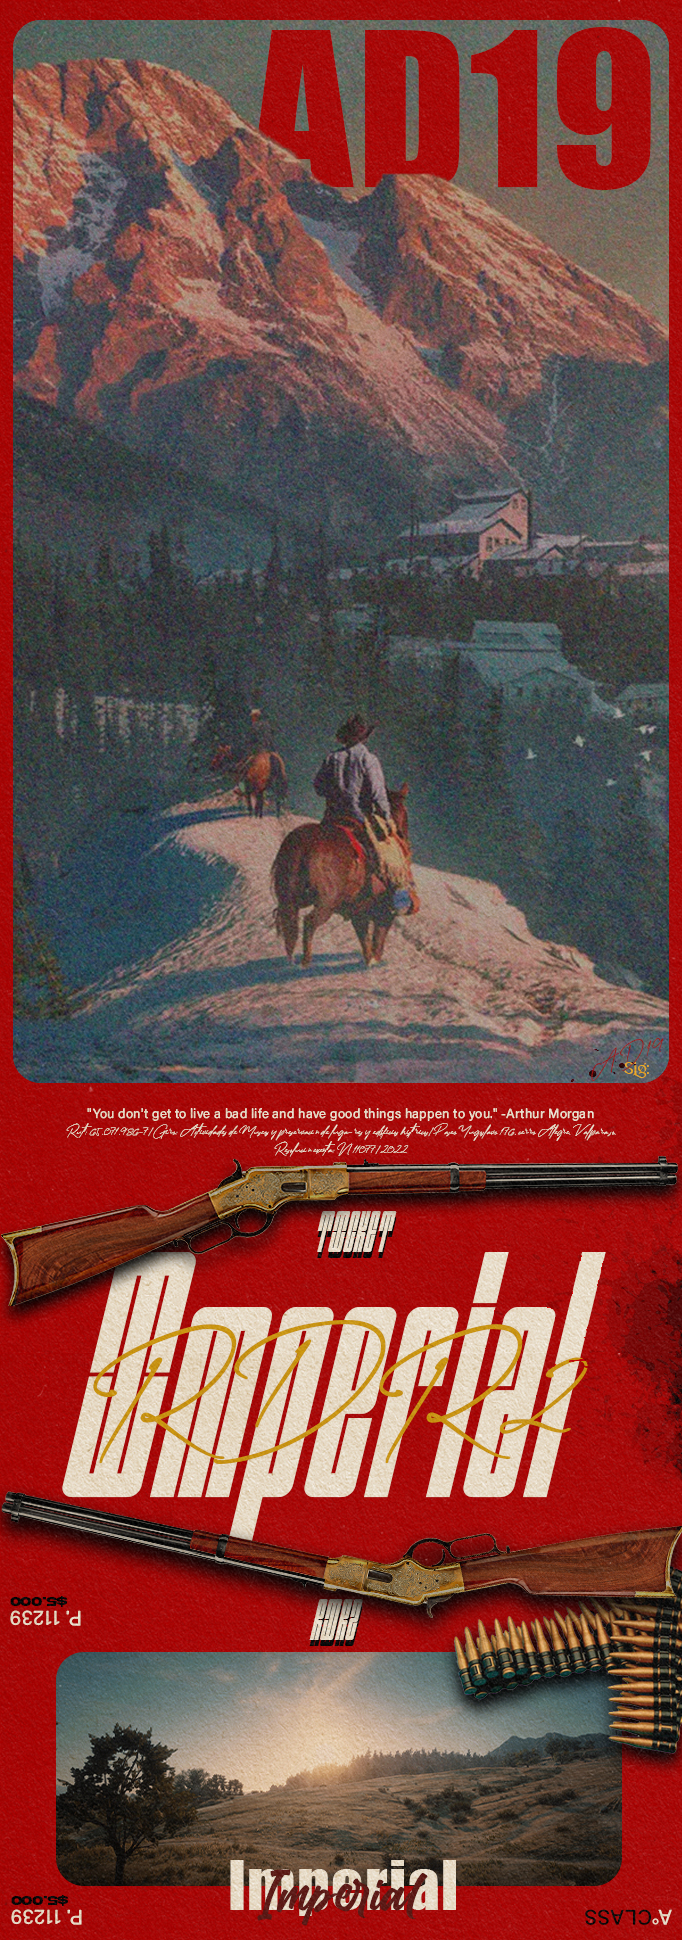 P_web_ game cards RDR2 copy